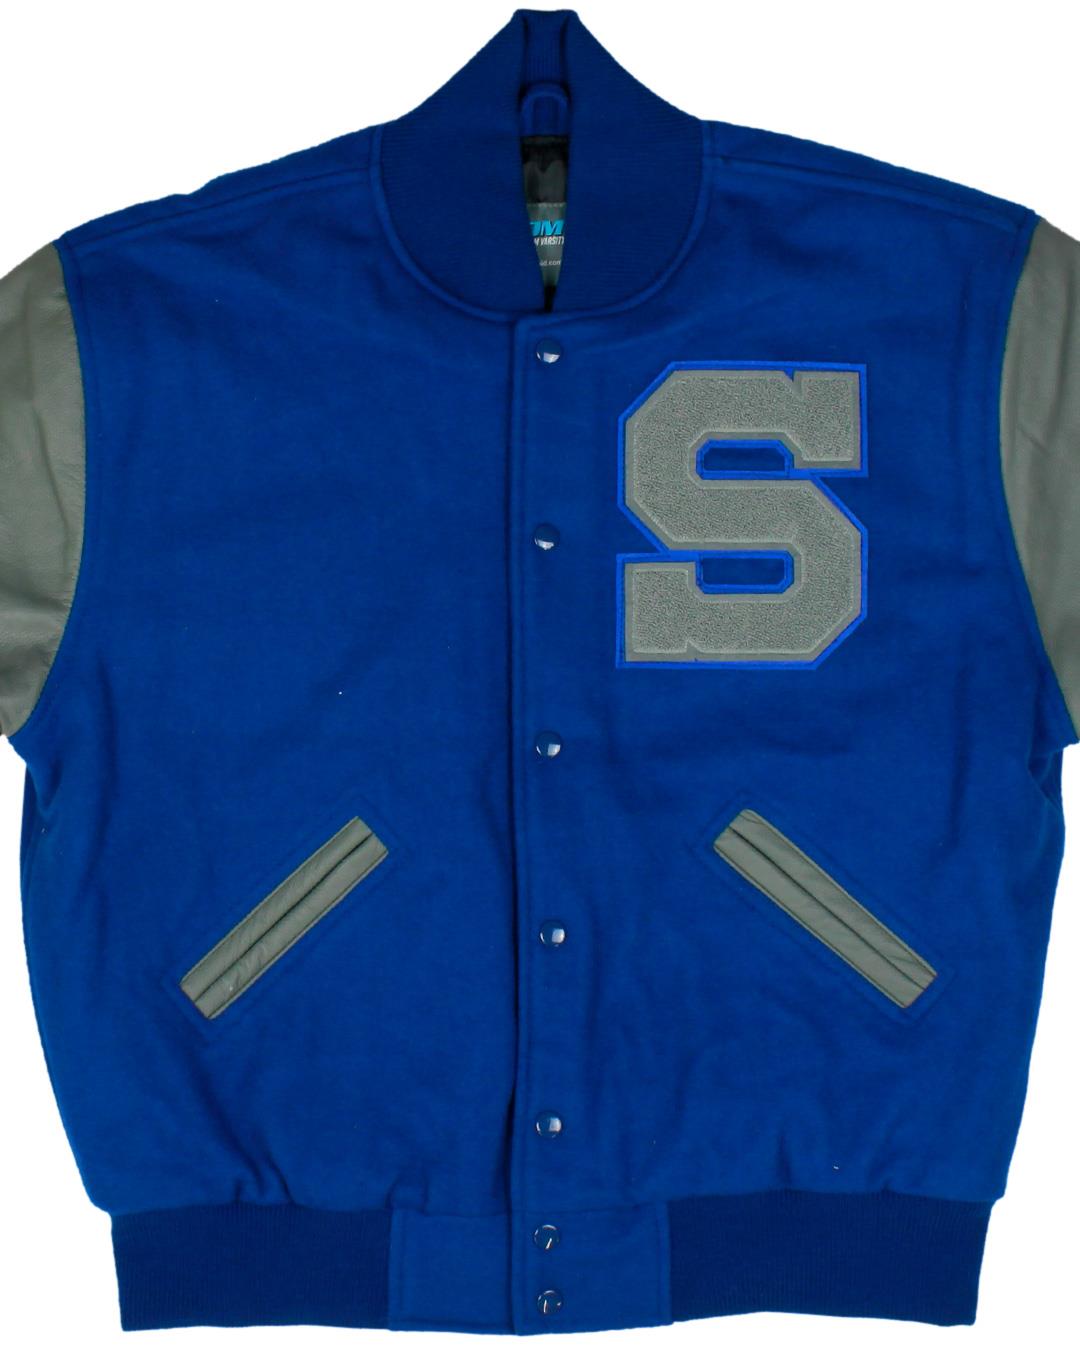 South High School Letterman Jacket, Columbus OH - Front